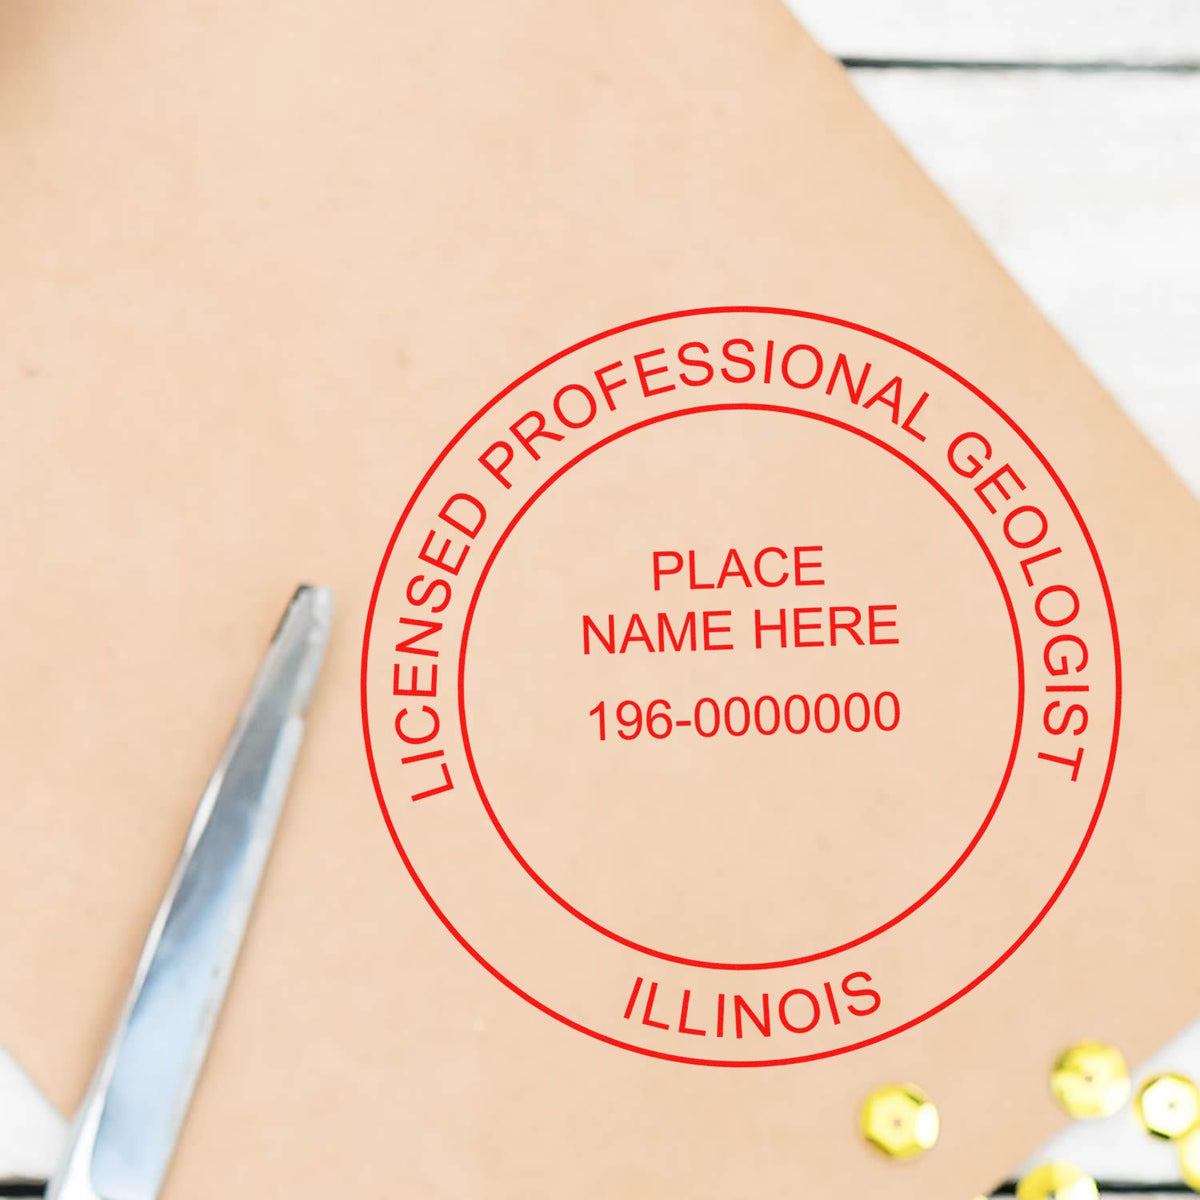 An in use photo of the Slim Pre-Inked Illinois Professional Geologist Seal Stamp showing a sample imprint on a cardstock